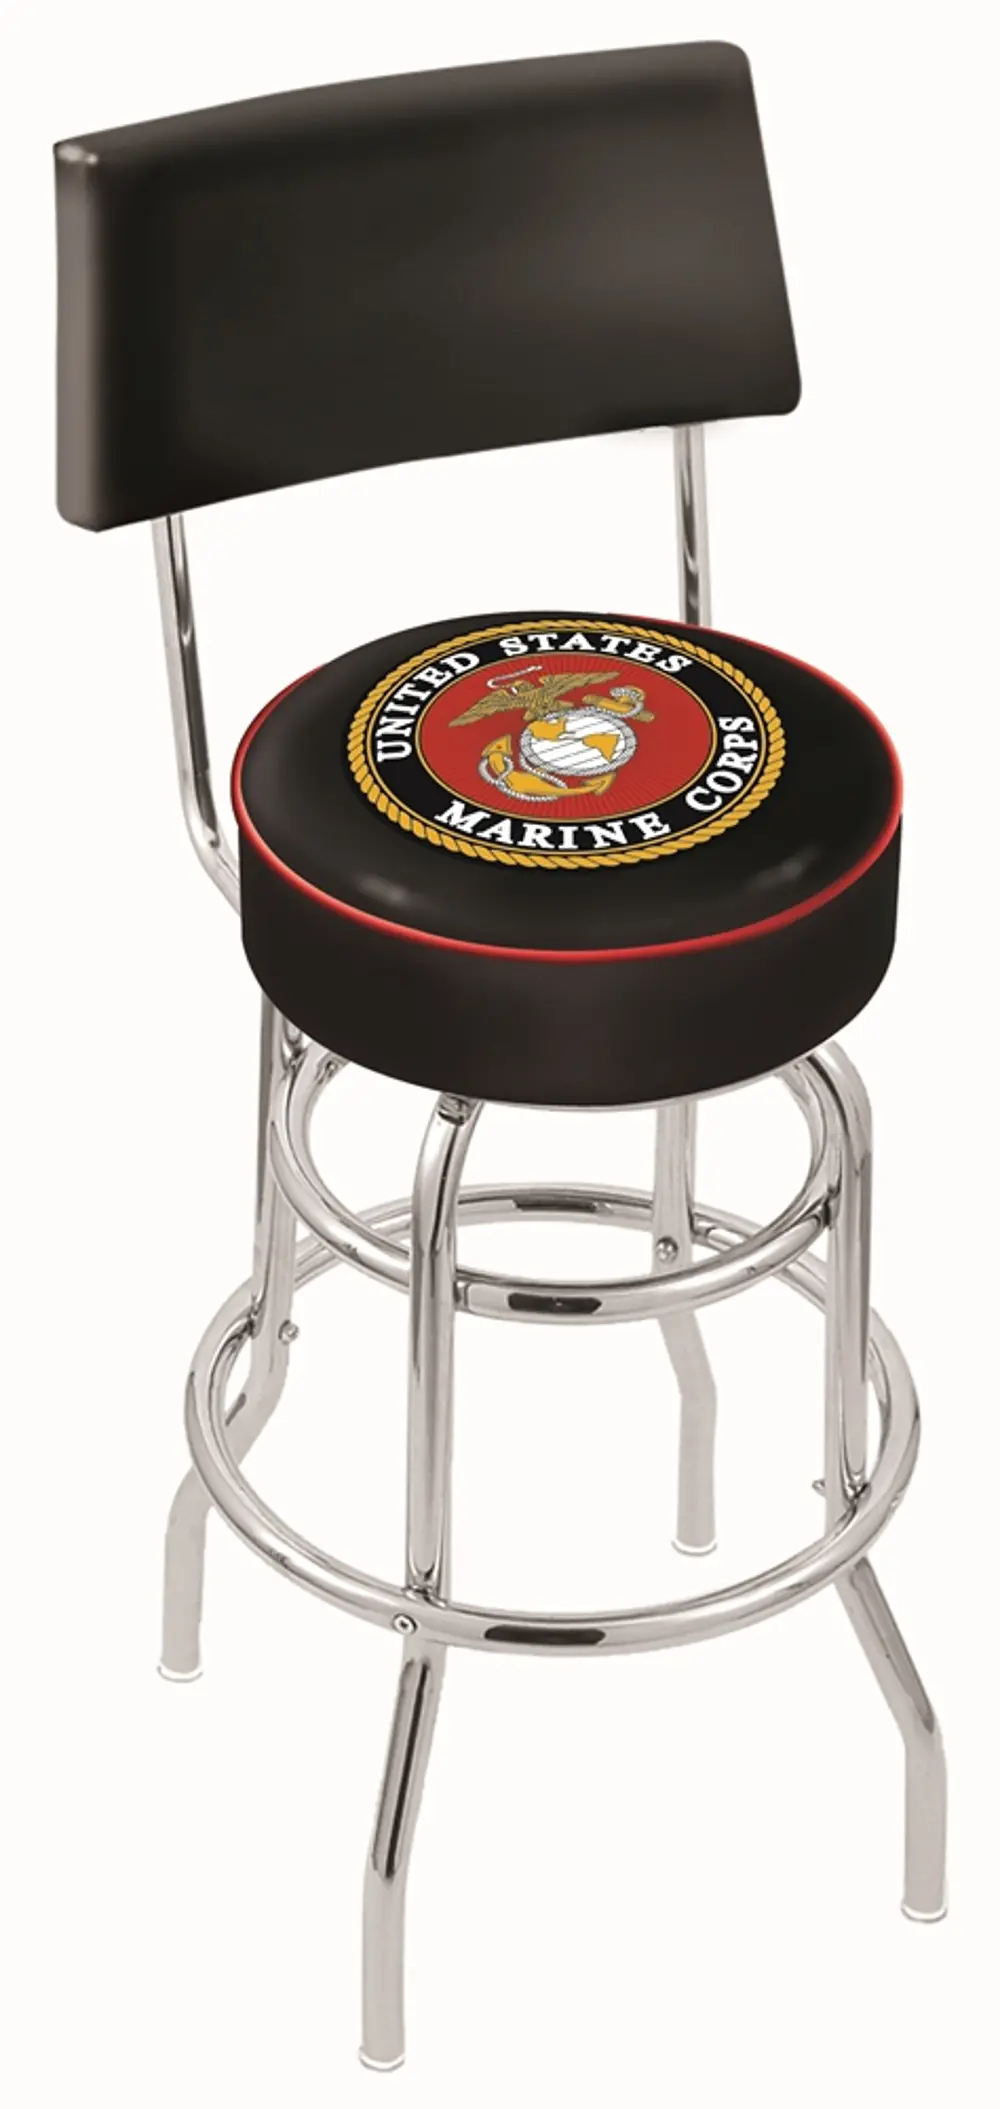 25 Inch Back Rest Swivel Counter Stool - US Marines-1